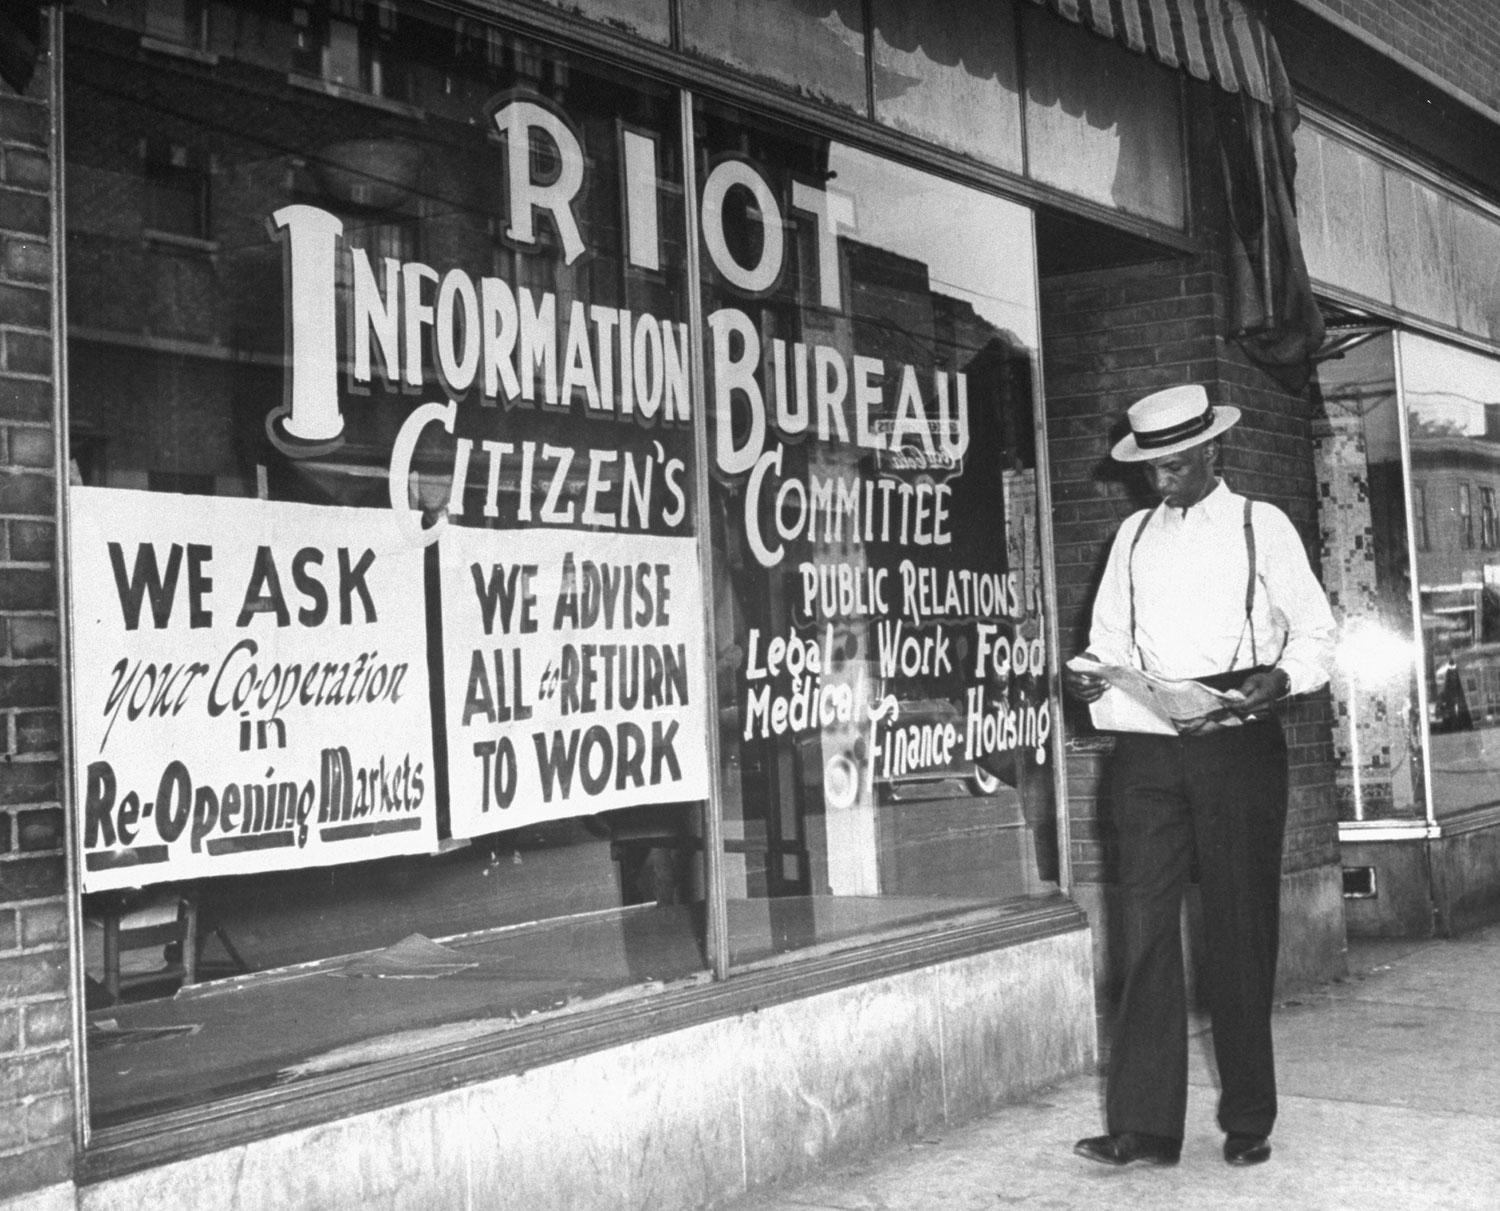 The Hastings Street Riot Information Bureau Citizens Committee, created by African Americans using a vacant storefront after wartime race riots swept Detroit, June 1943.